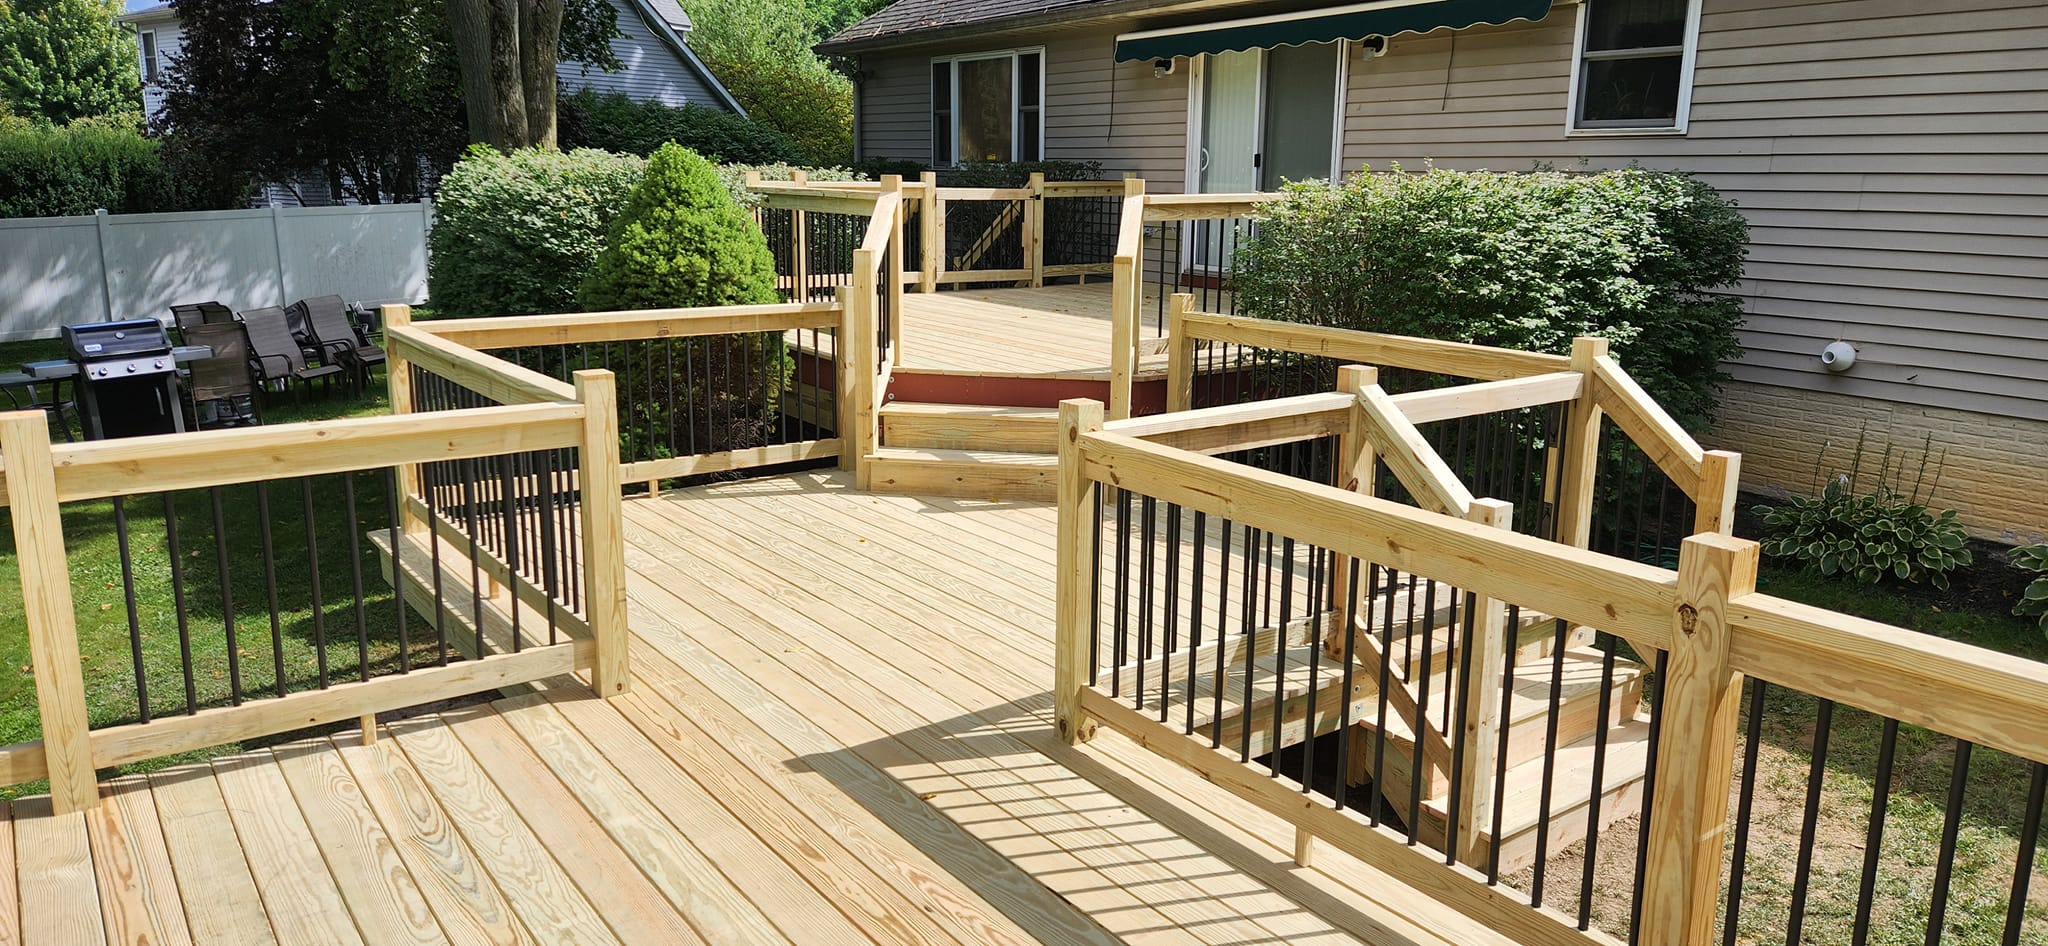 Rotting Deck Causes and Repair Guide for Ohio Homeowners